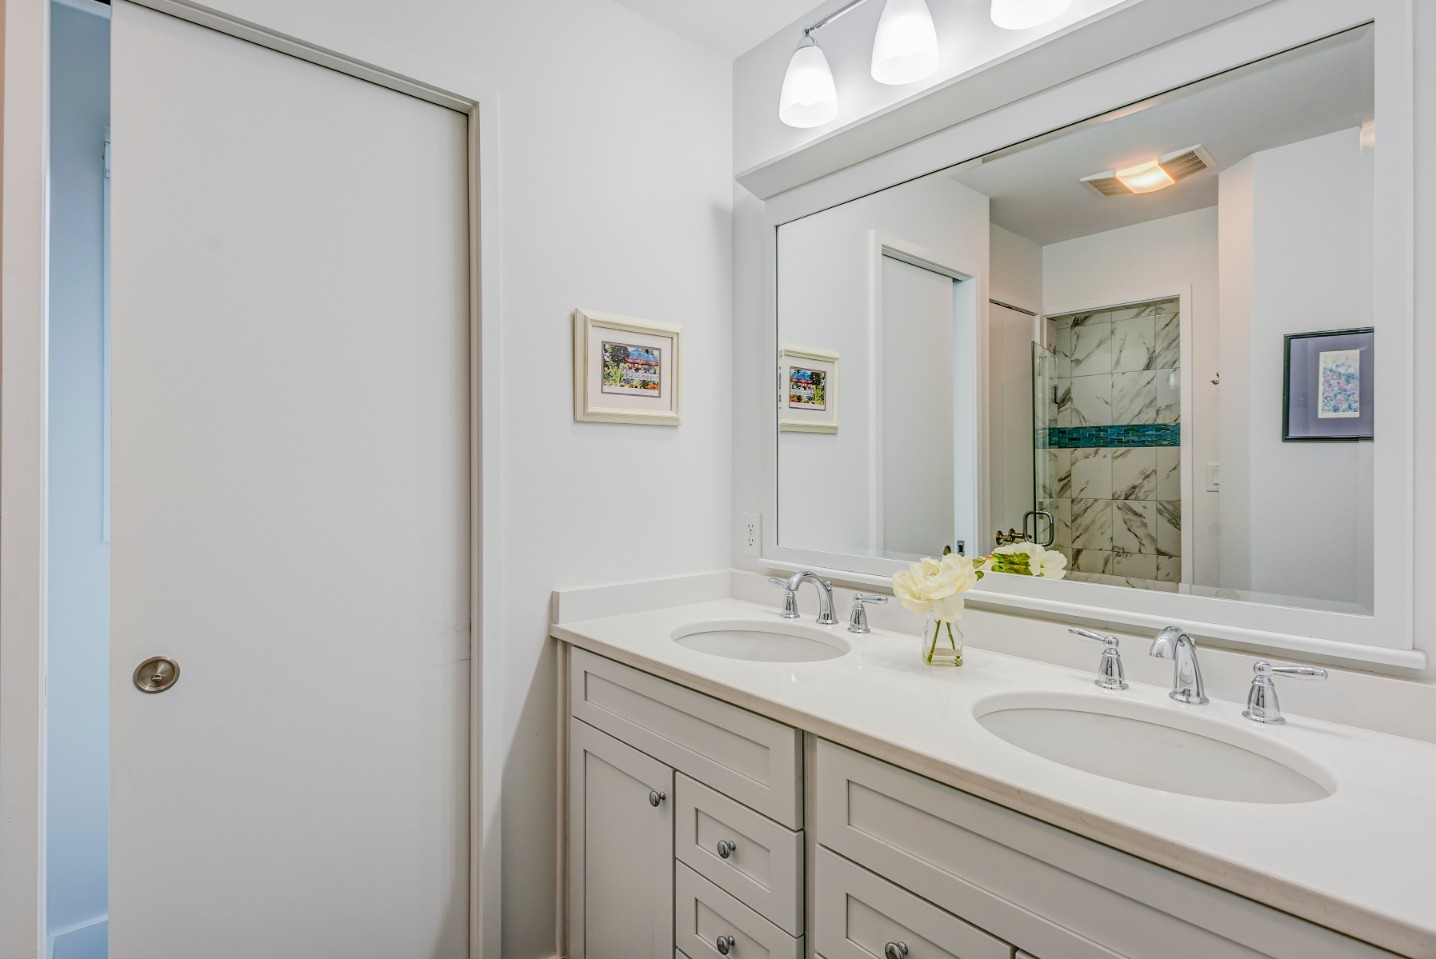 Cotton Patch Hills Renovation in Bethany Beach DE - Bathroom with Dual Sink, White Shaker Cabinets and White Top